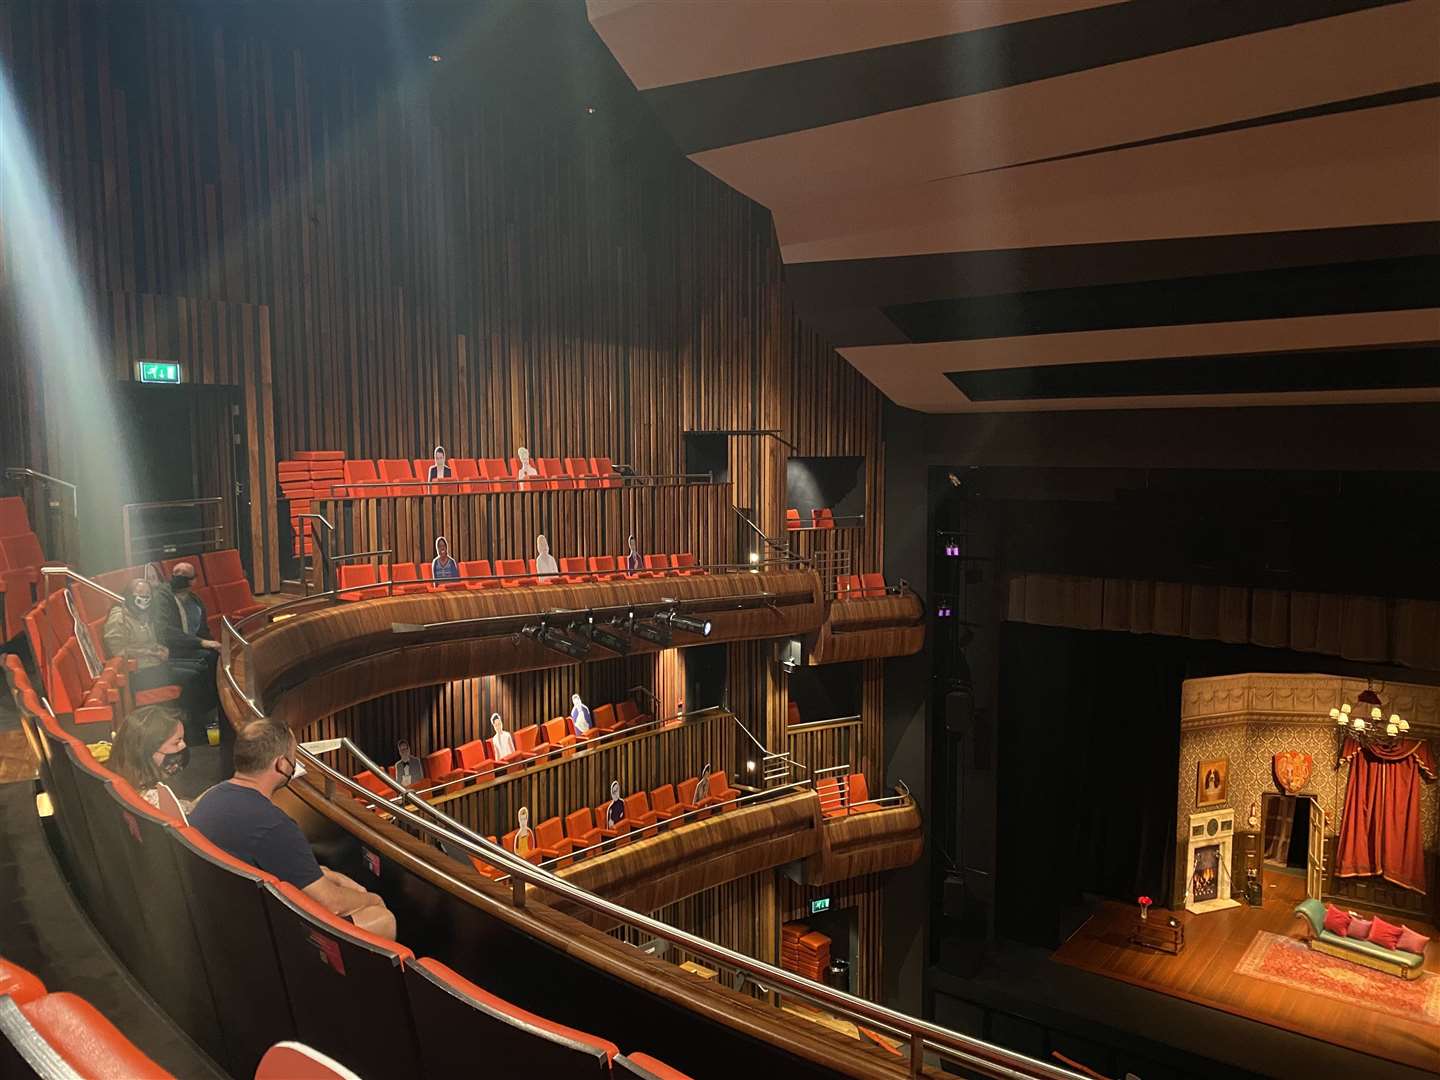 Cardboard cut-outs filled the socially distanced seats at the Marlowe Theatre